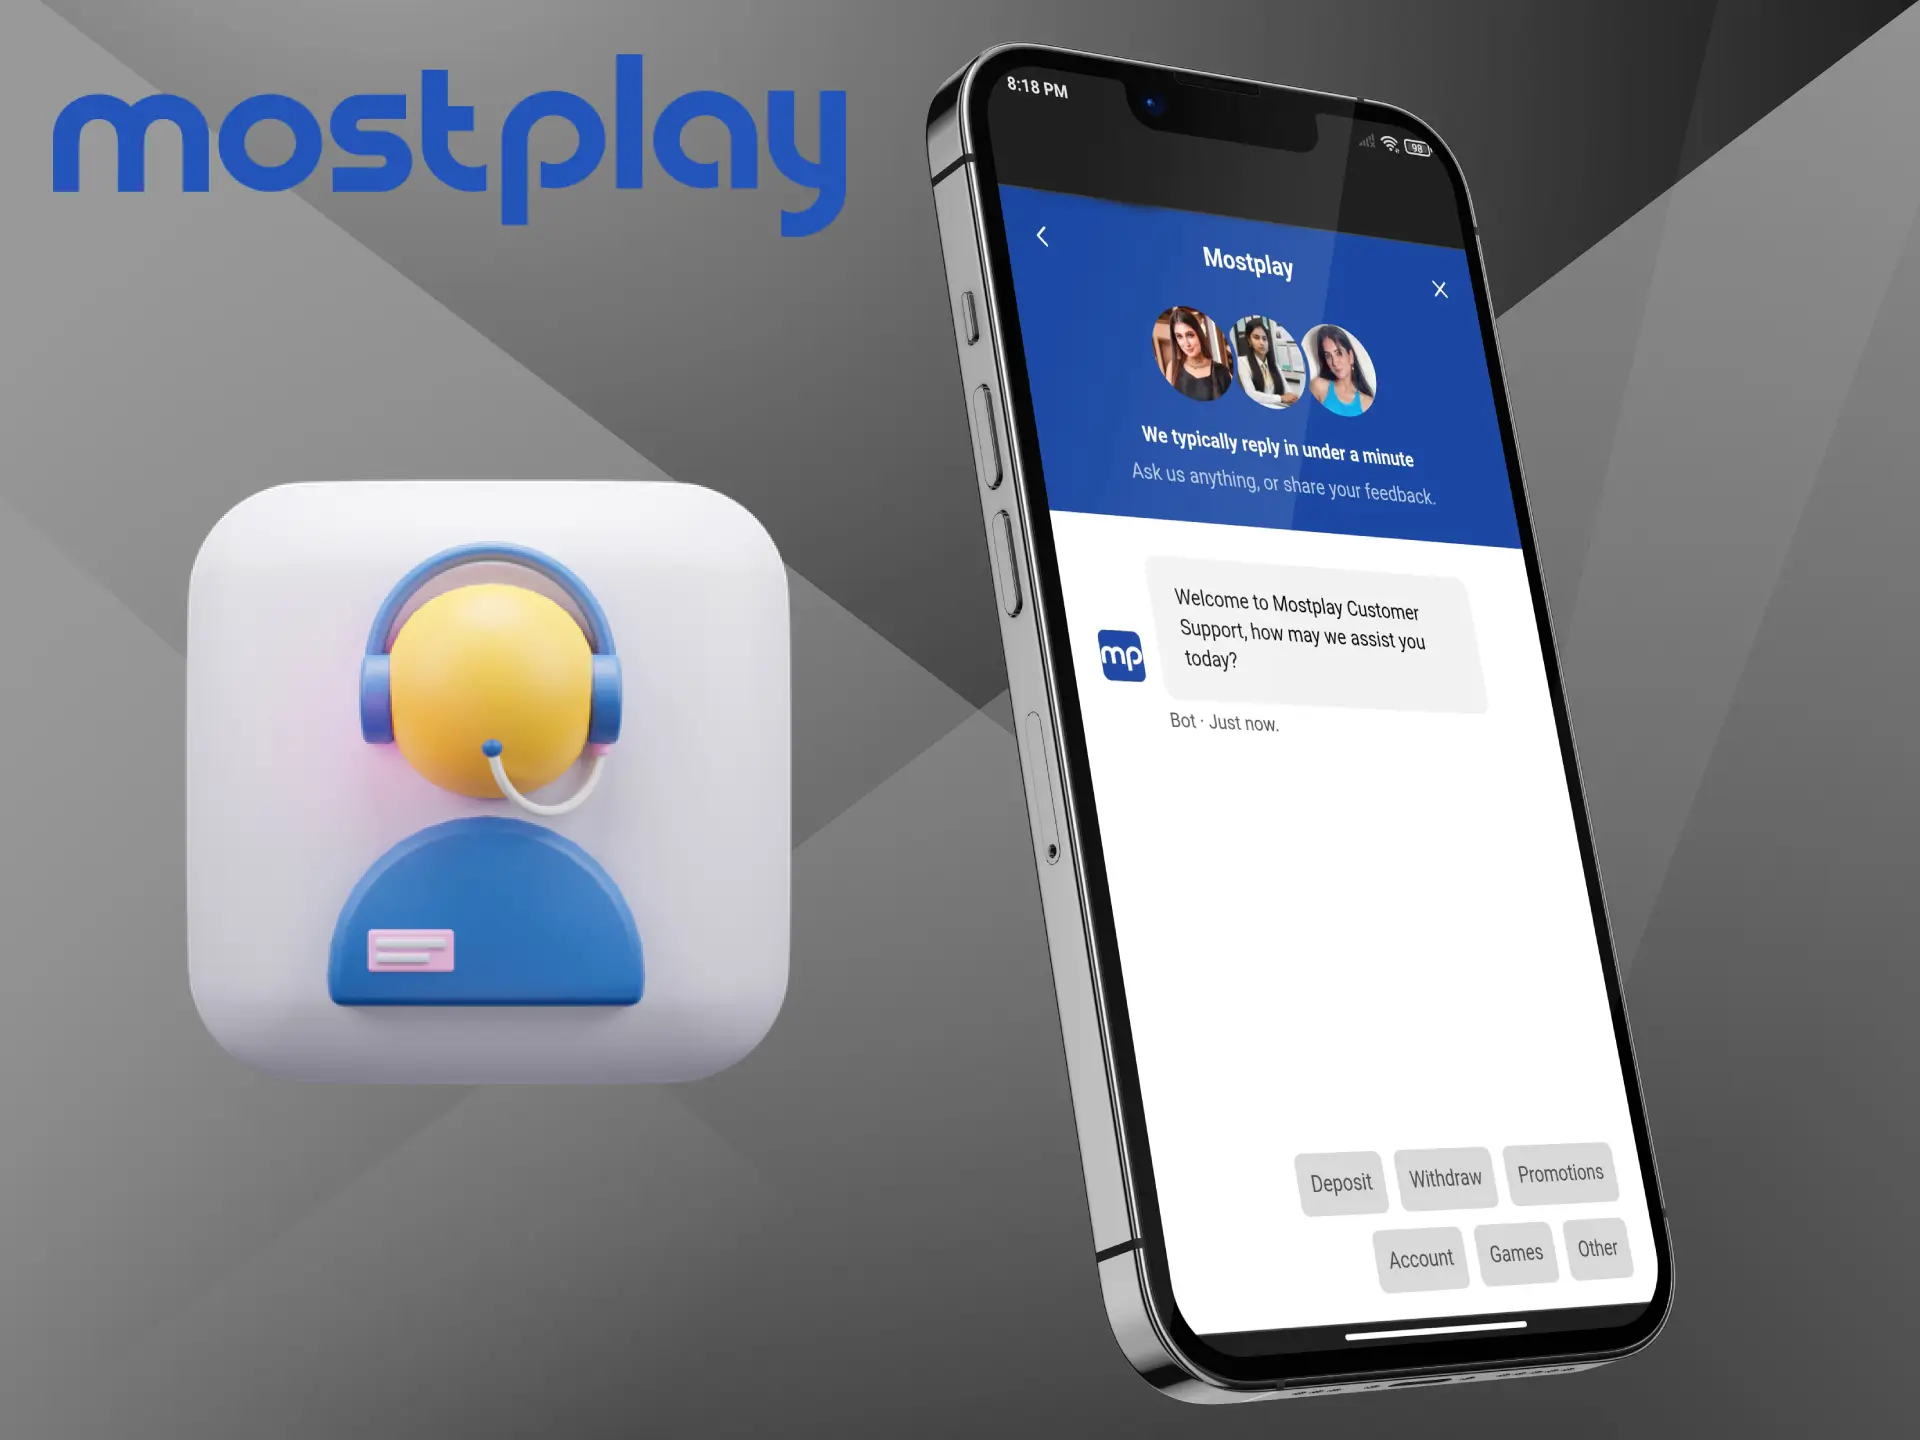 Mostplay's customer support team is available 24/7 for any questions you may have regarding withdrawals.